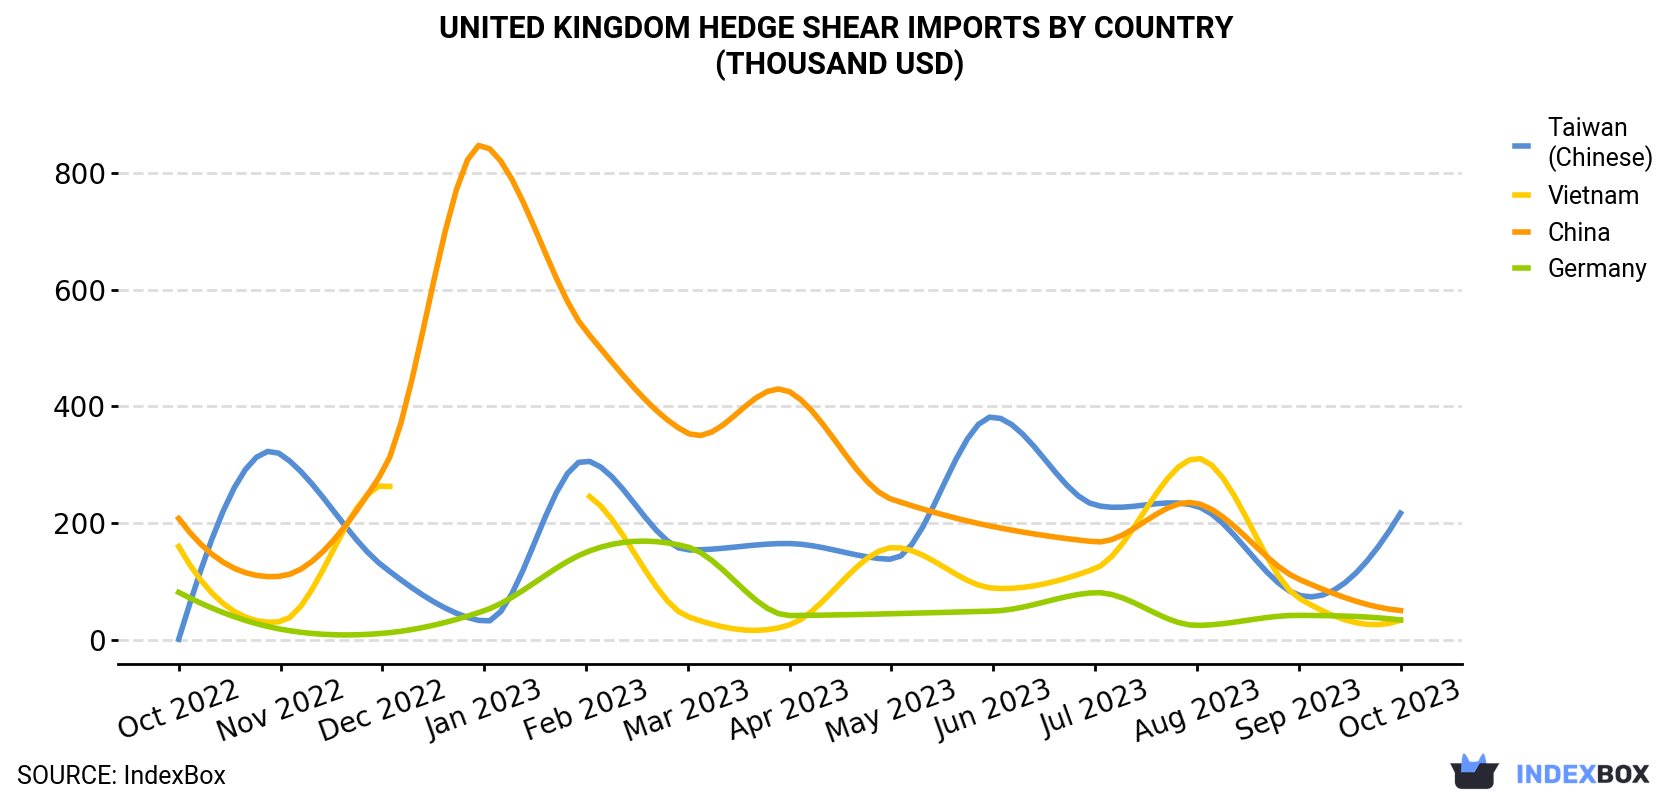 United Kingdom Hedge Shear Imports By Country (Thousand USD)